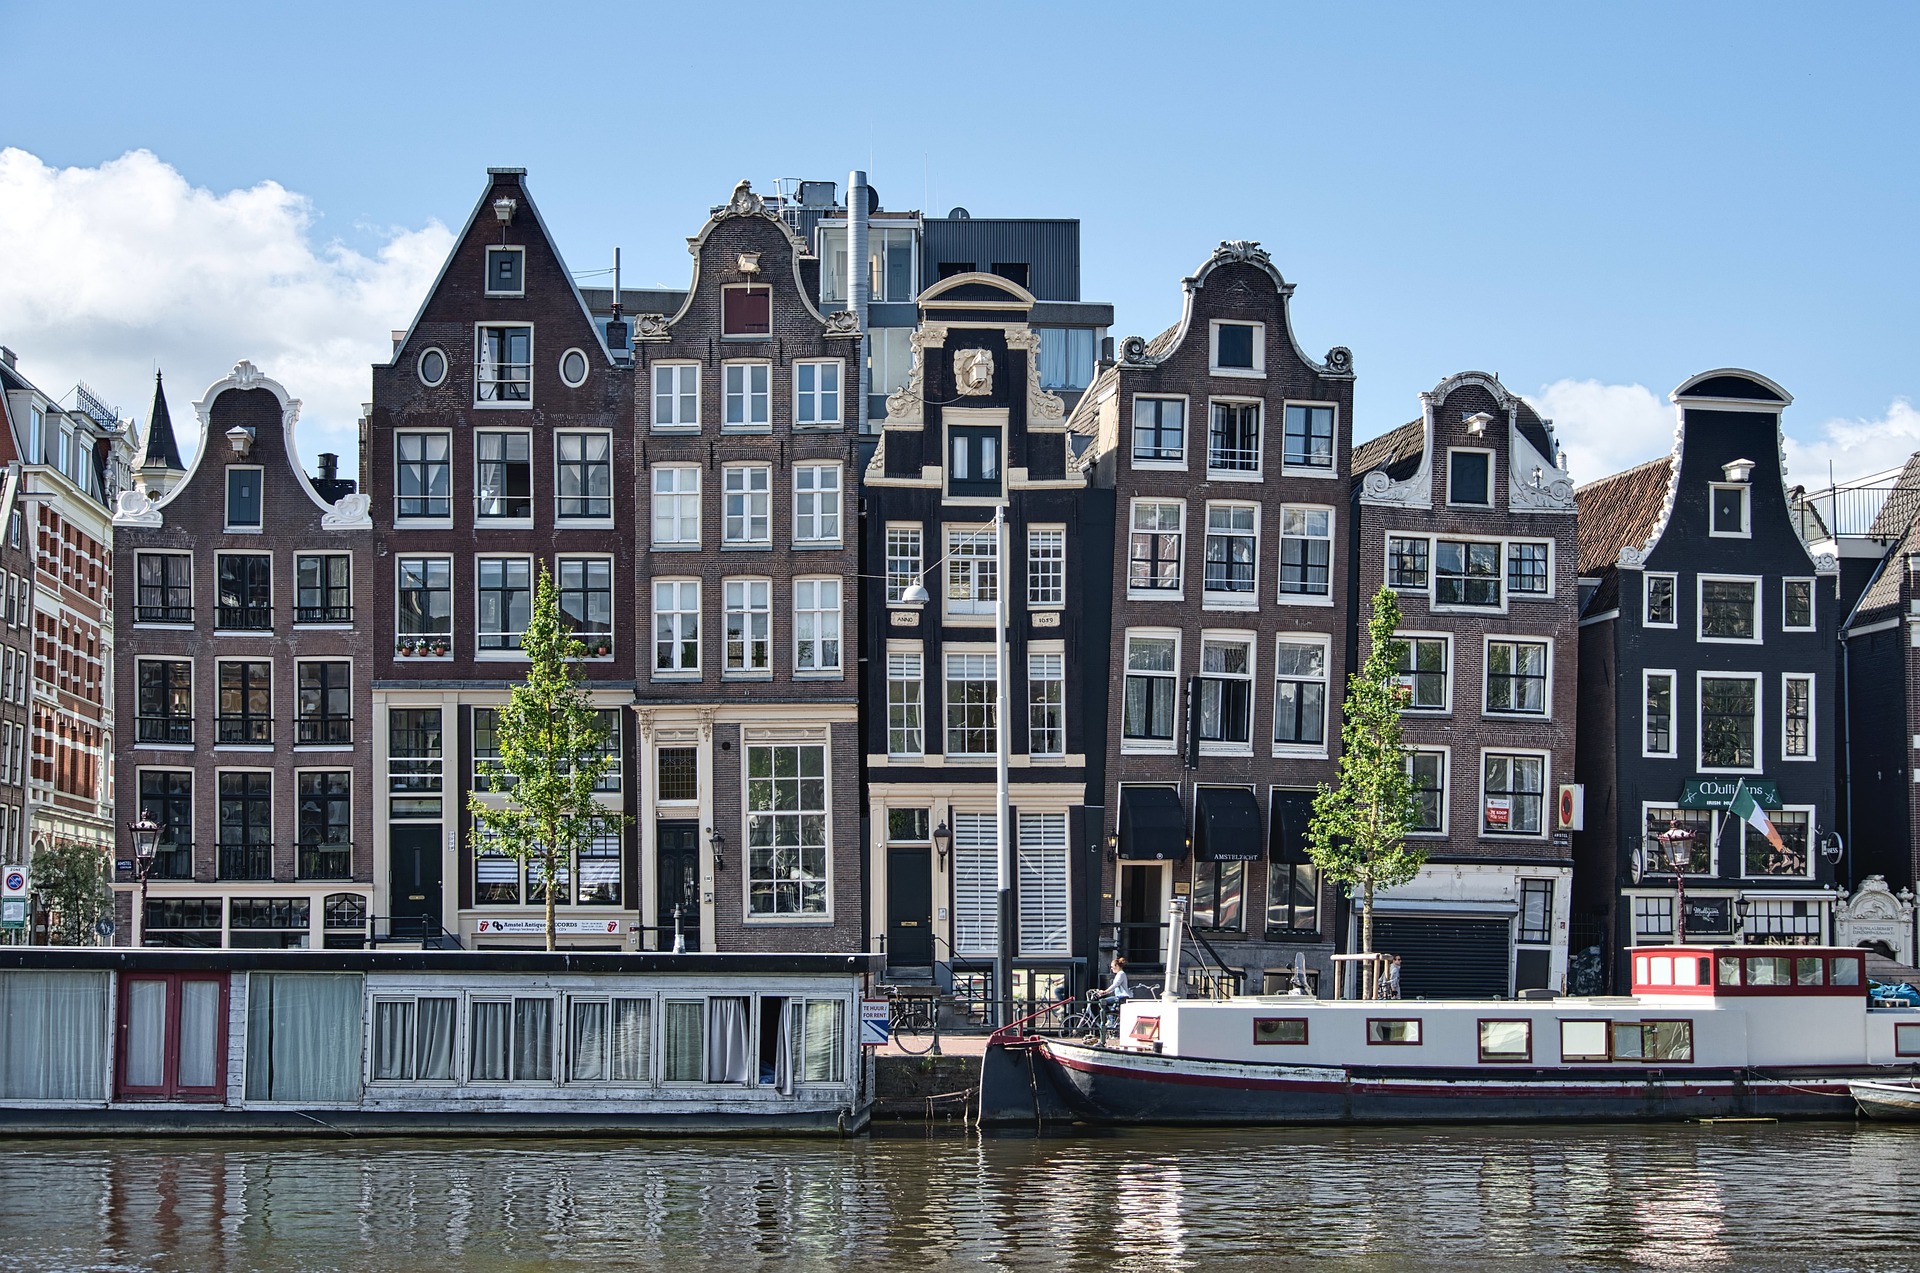 View of houses in Amsterdam across a canal